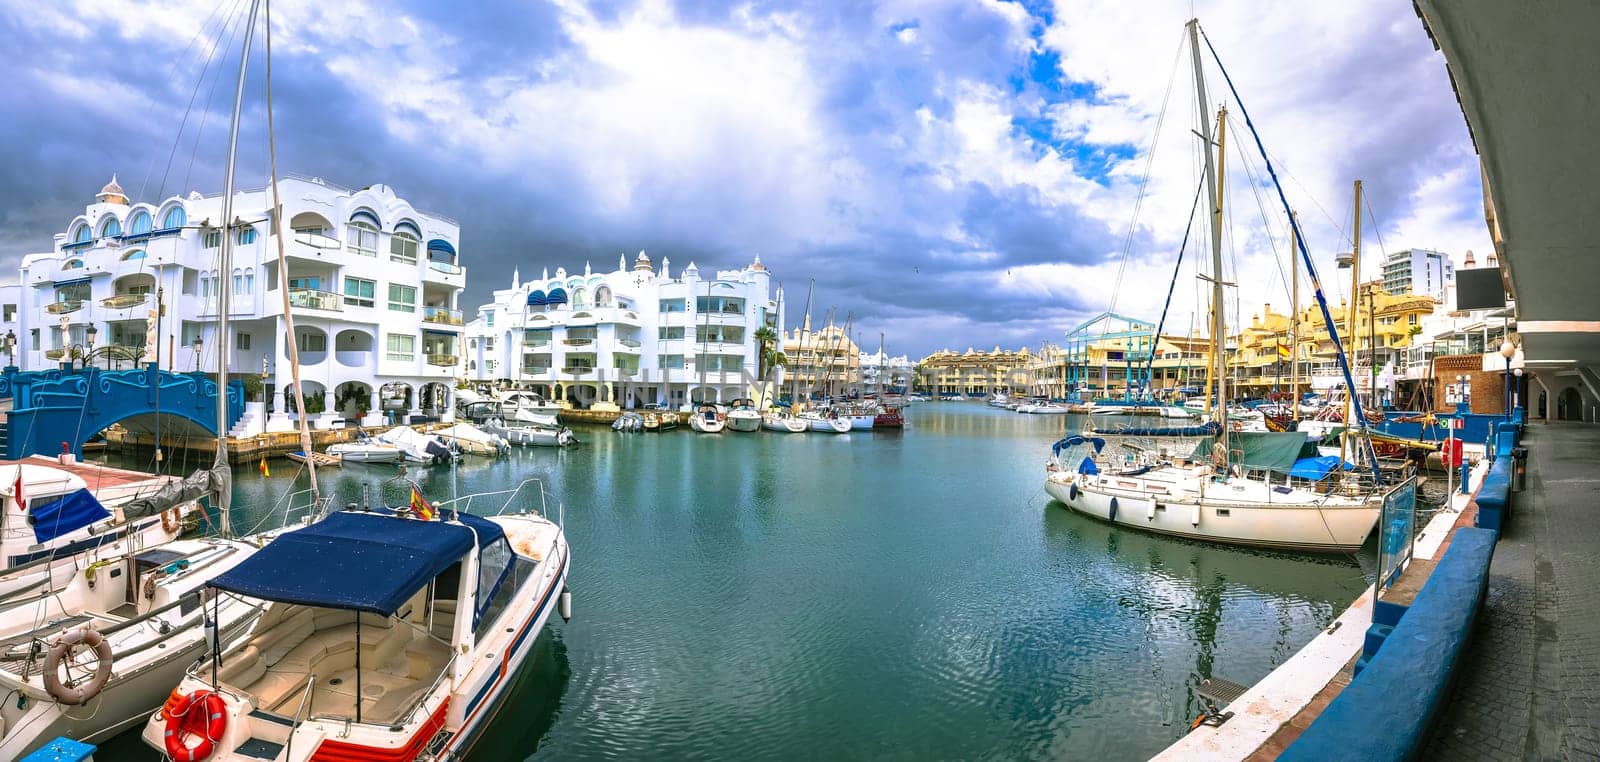 Benalmadena scenic port architecture panoramic view, Andalusia region, southern Spain